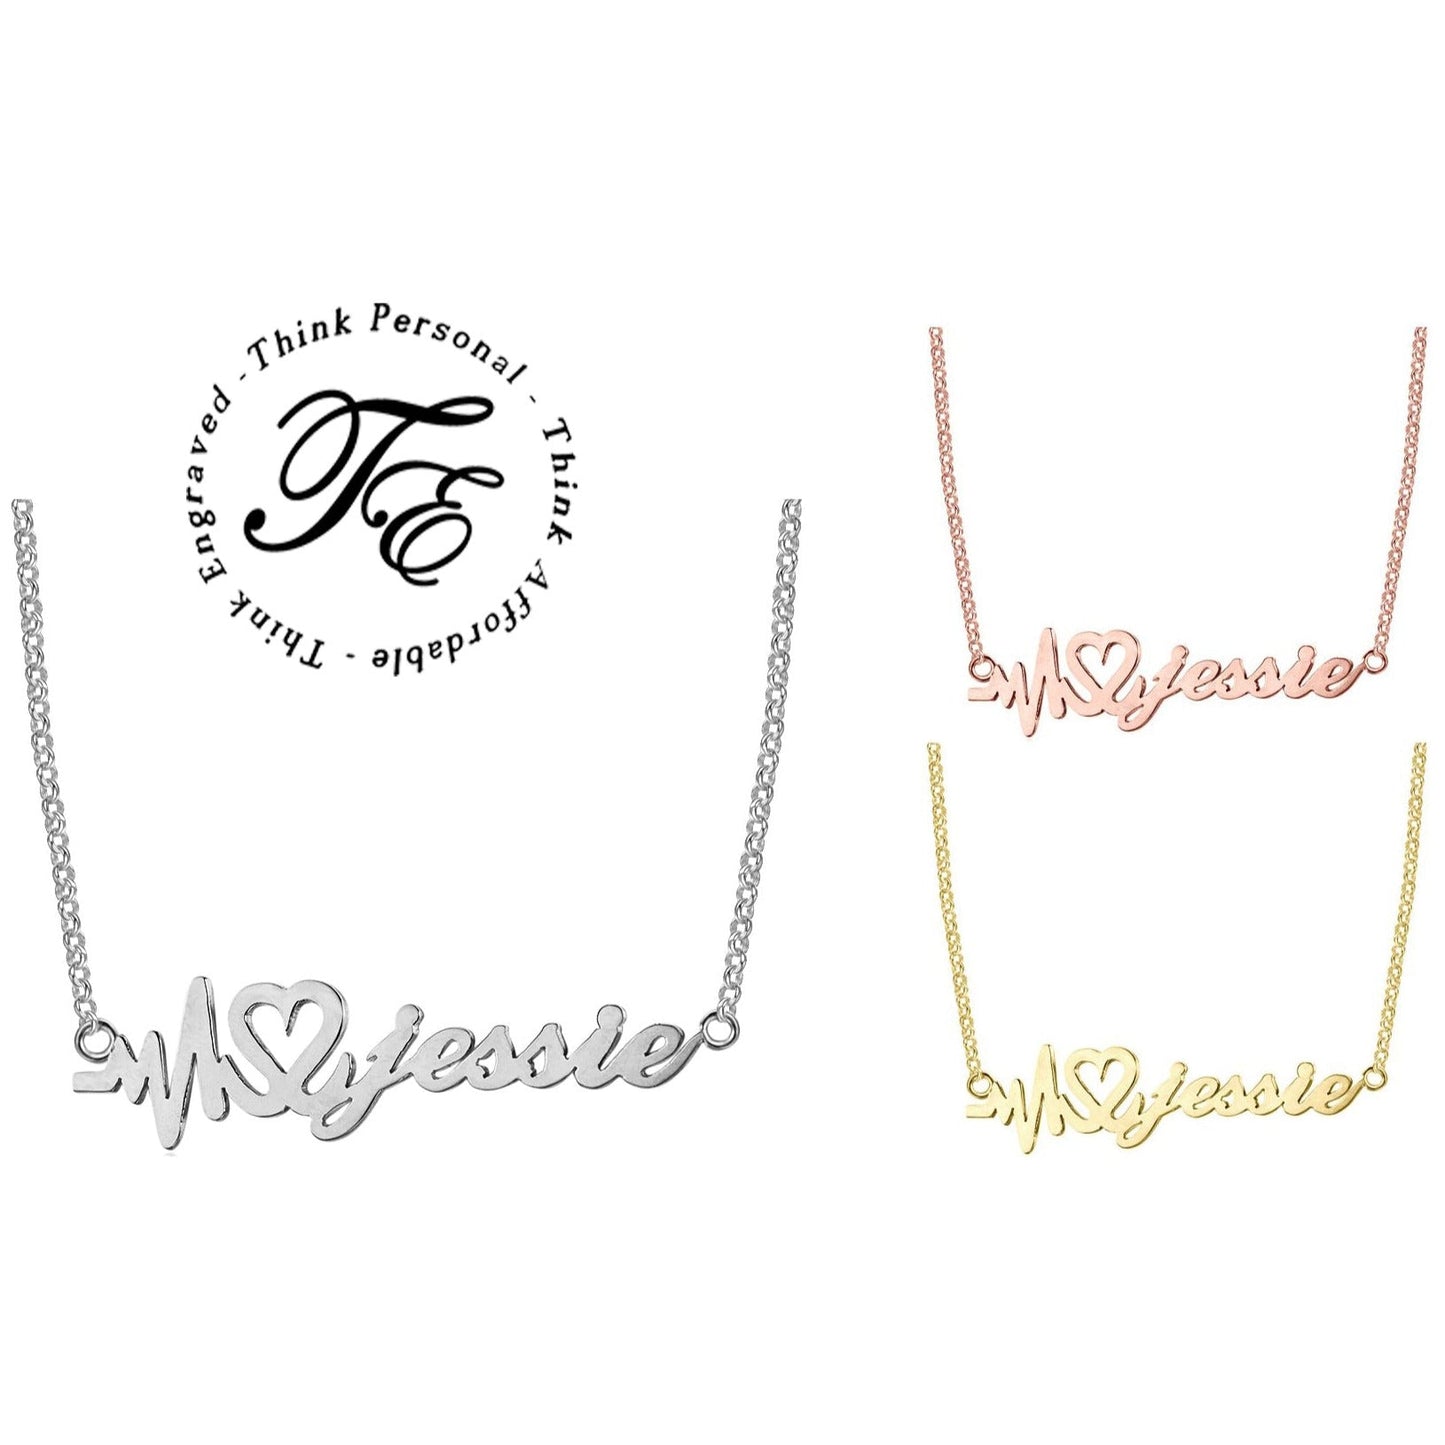 ThinkEngraved cutout Personalized Heartbeat Name Necklace - Silver Gold or Rose Gold